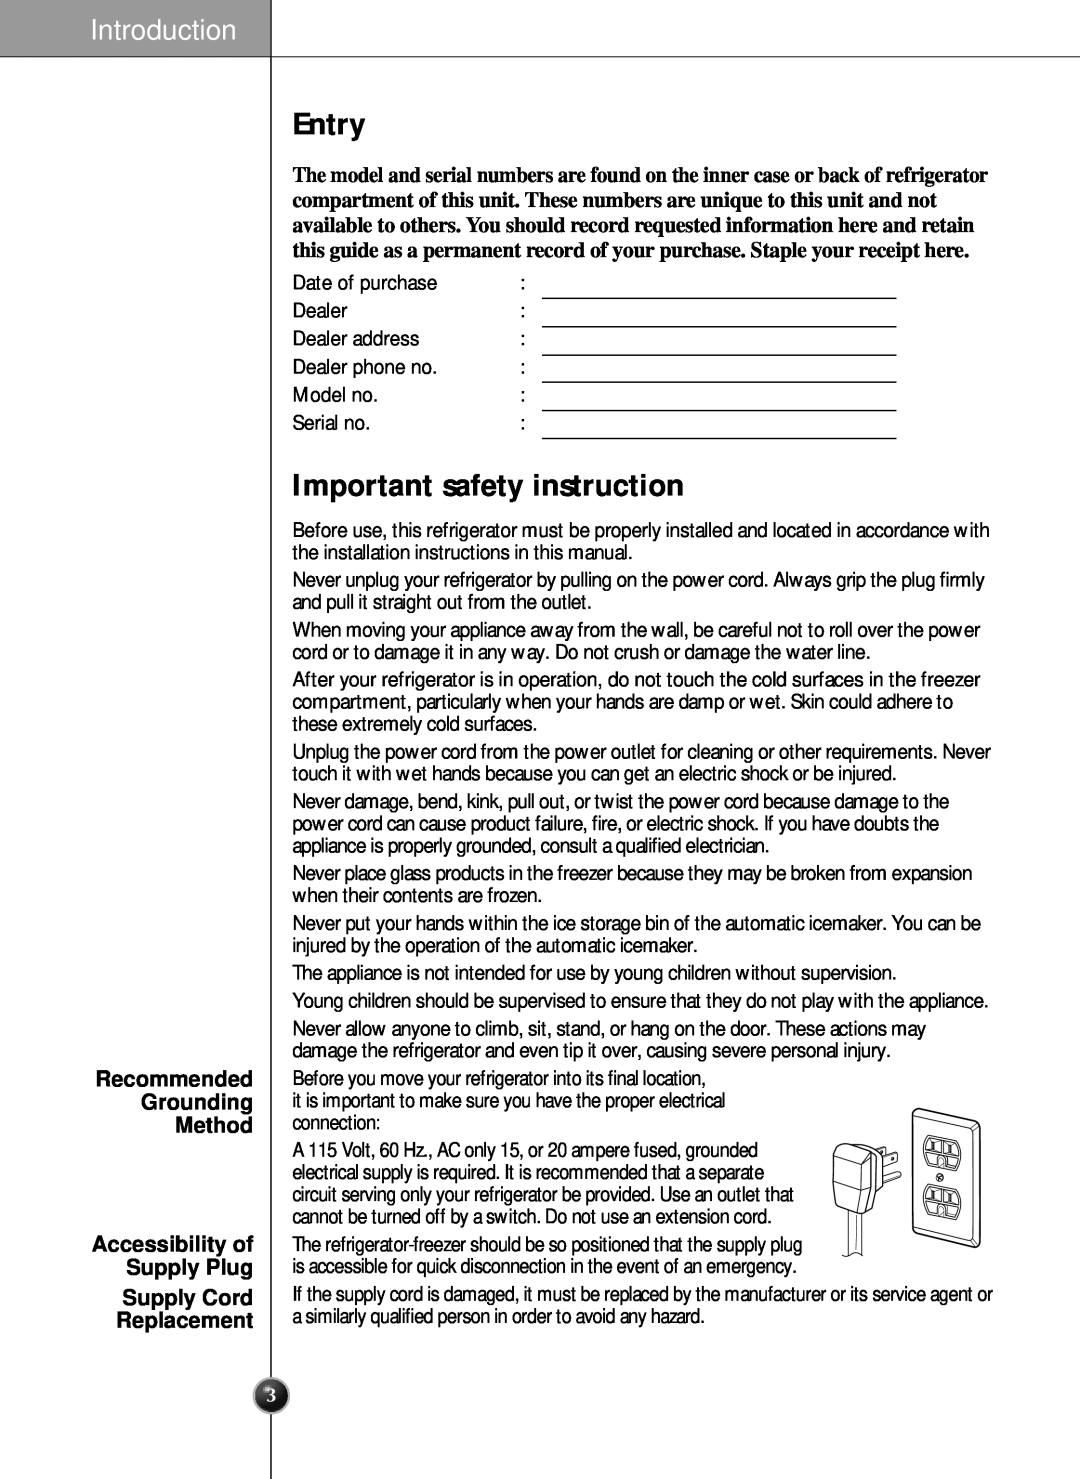 LG Electronics LRSC 26980TT manual Entry, Important safety instruction, Introduction, Replacement 